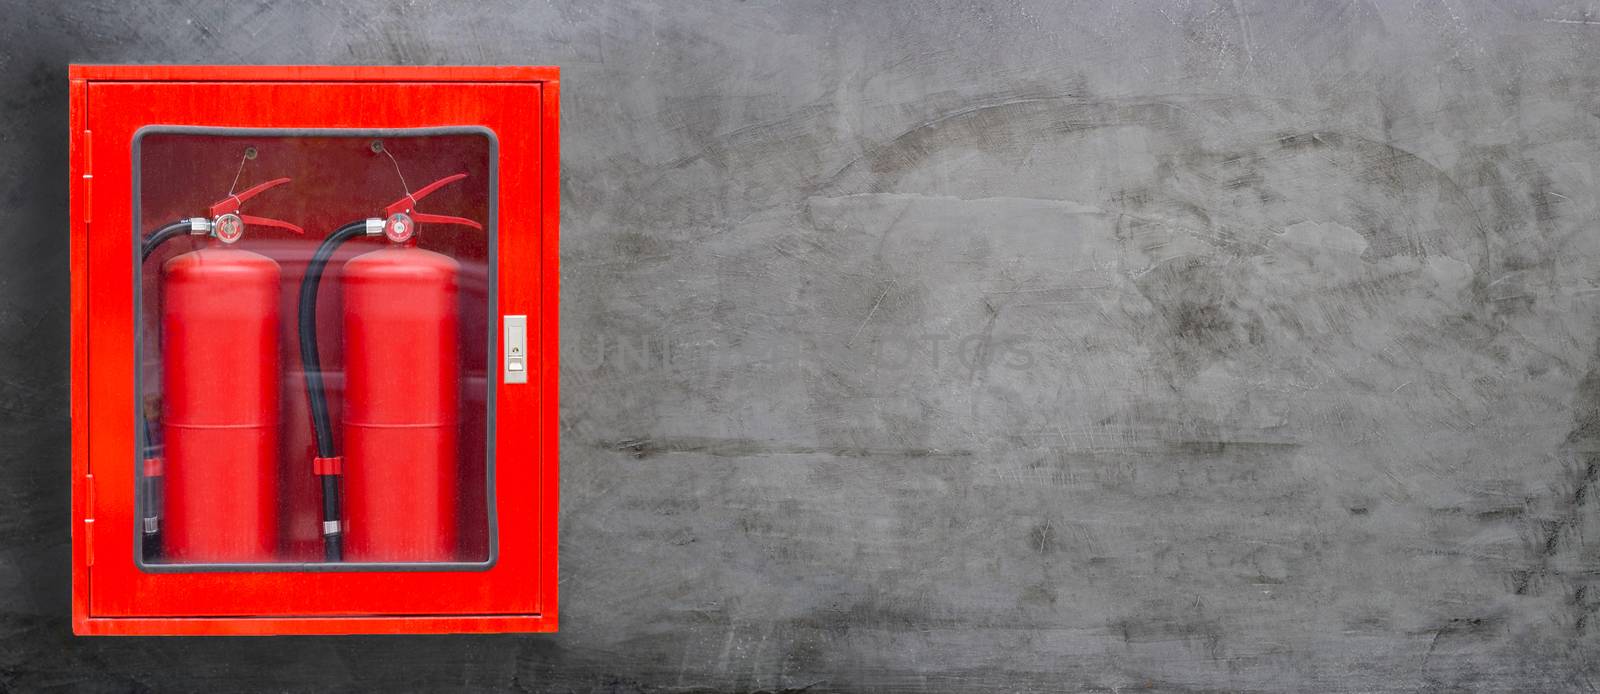 Fire Extinguisher in red cabinet on concrete wall background. by Bowonpat